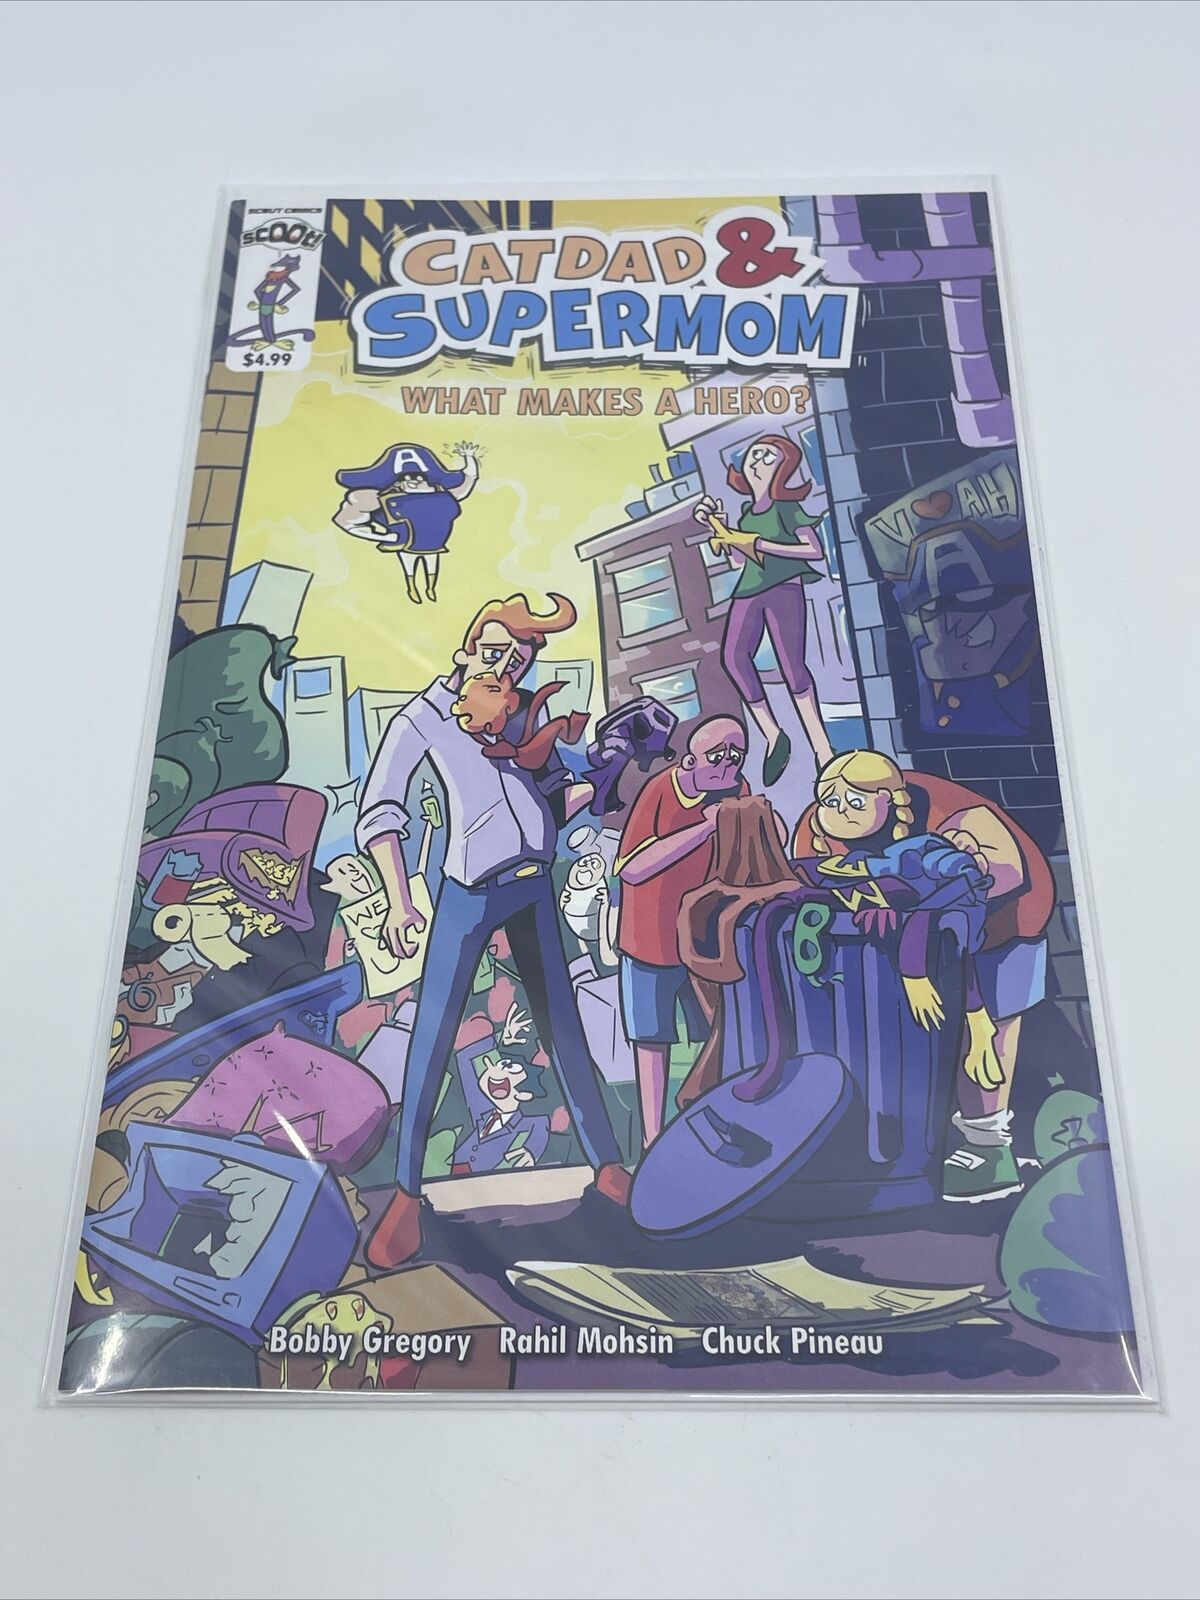 Catdad & Supermom: What Makes a Superhero #1A Scout (Oct 26 2022) Comic Book